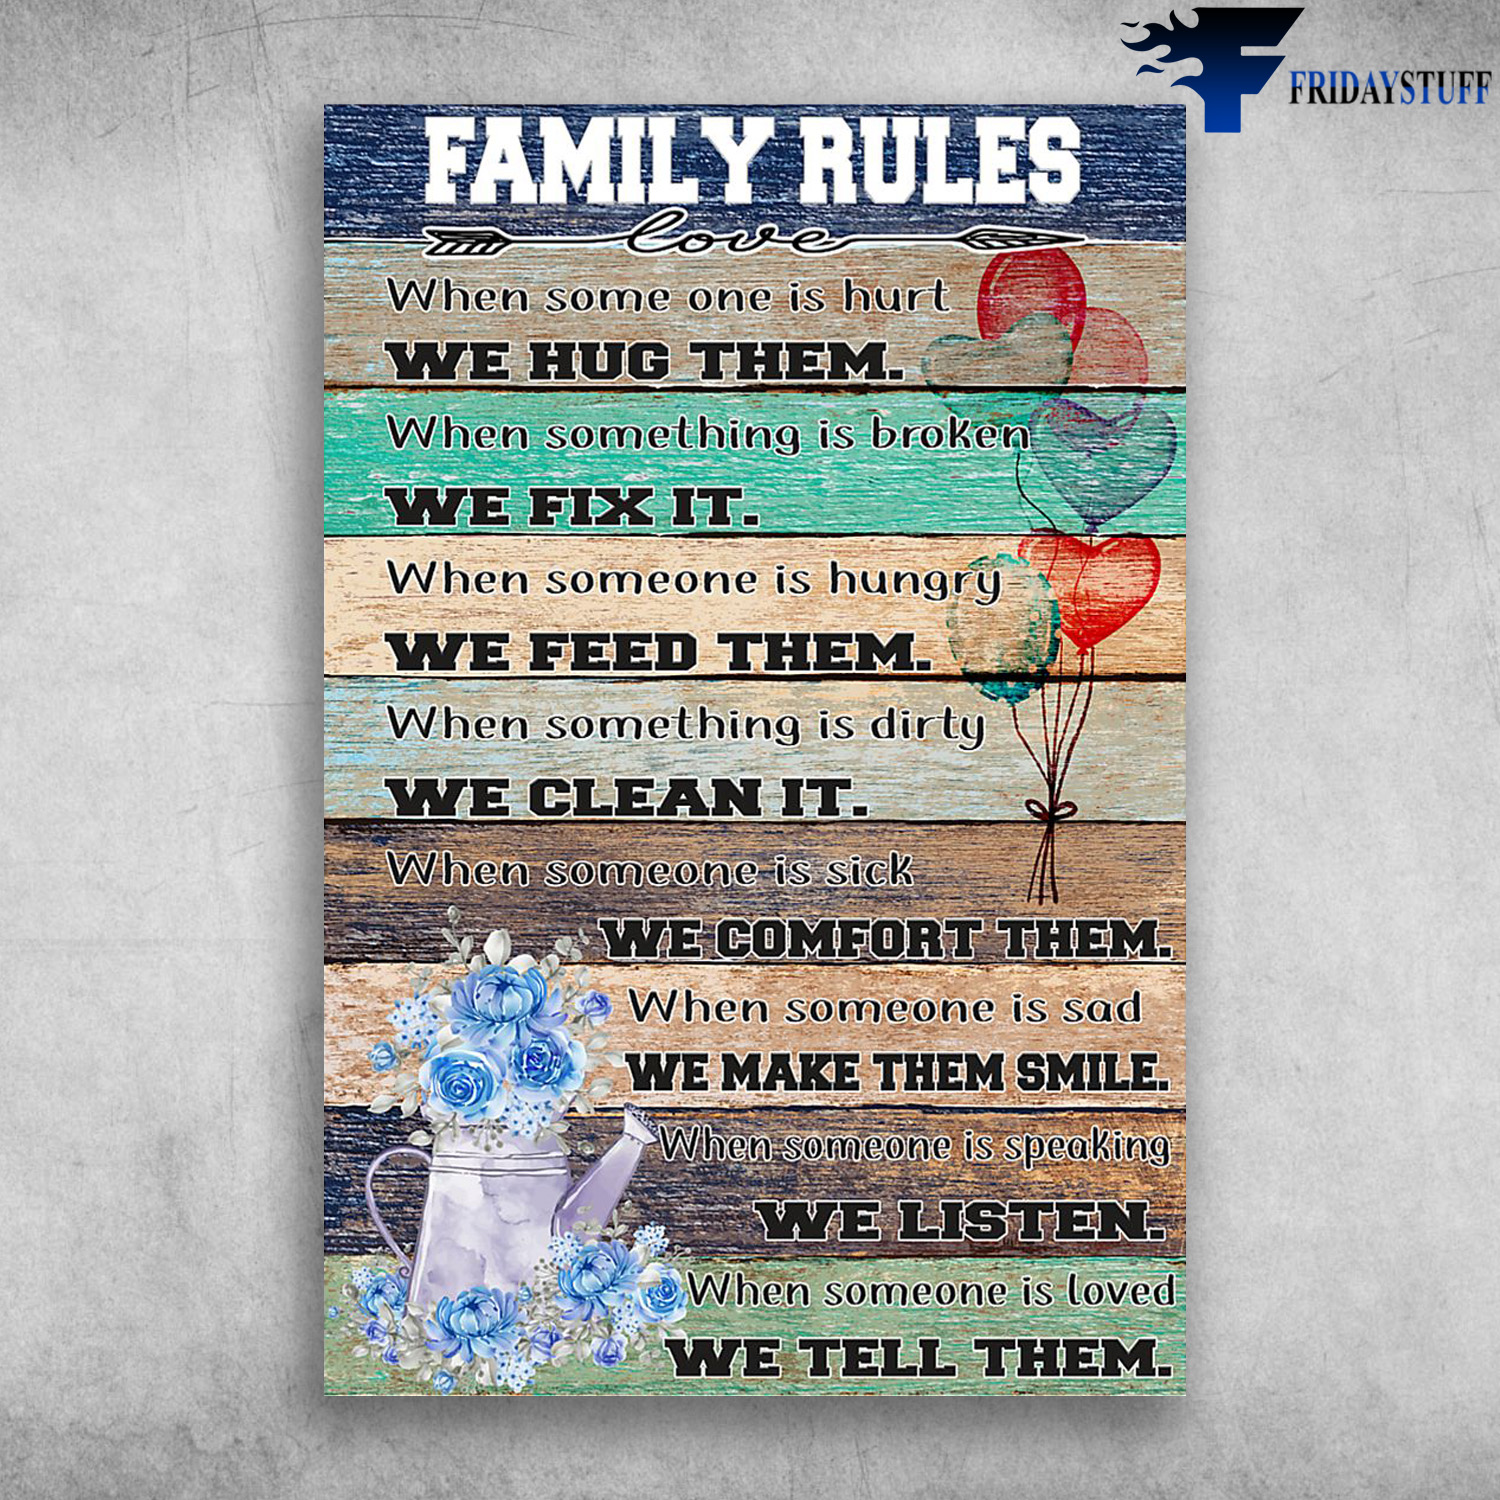 Family Rules - When Some One Is Hurt, We Hug Them, When Something Is Broken, We Fix It, When Someone Is Hungry, We Feed Them, When Something Is Dirty, We Clean It, When Someone Is Sick, We Comfort Them